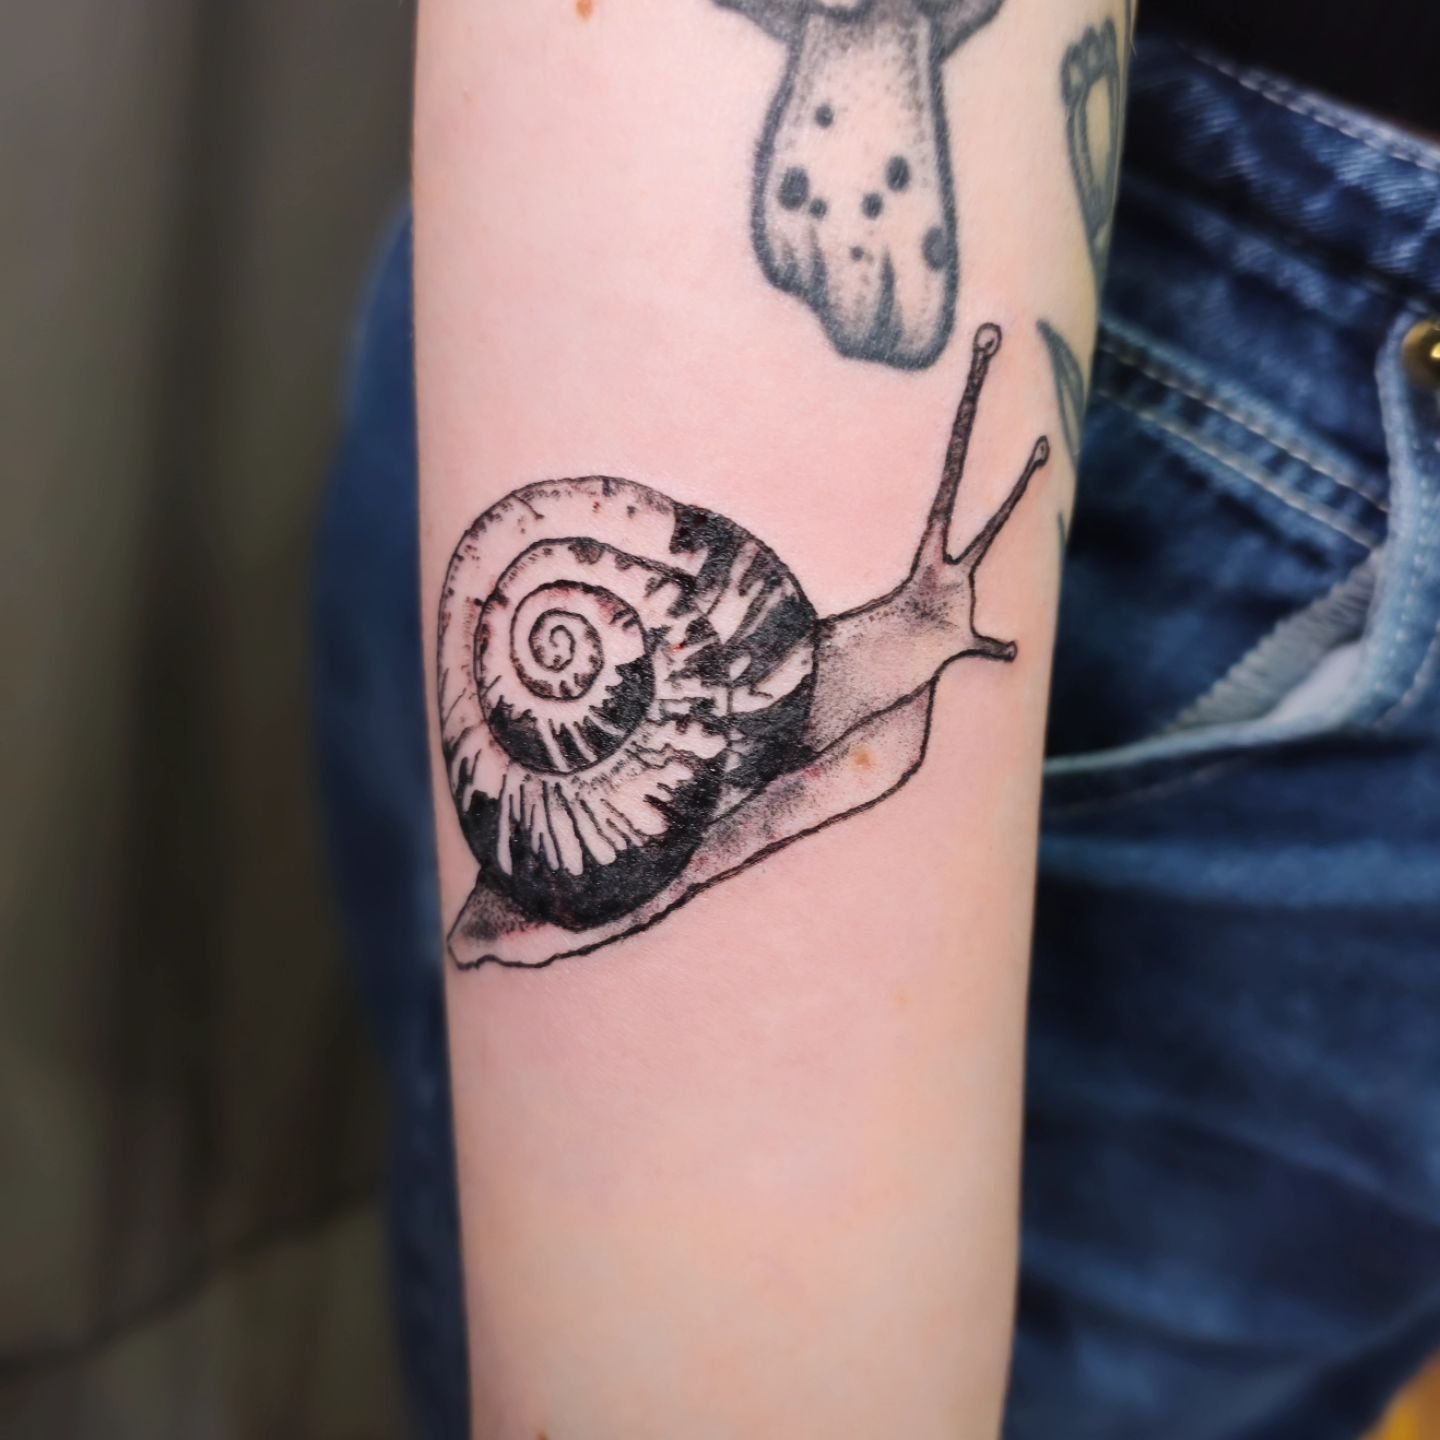 Did a fun little walk in last night- snails are so cute 🐌

I'm available at @robotpiercingtattoo Monday-Tuesday and Friday-Saturday. (: